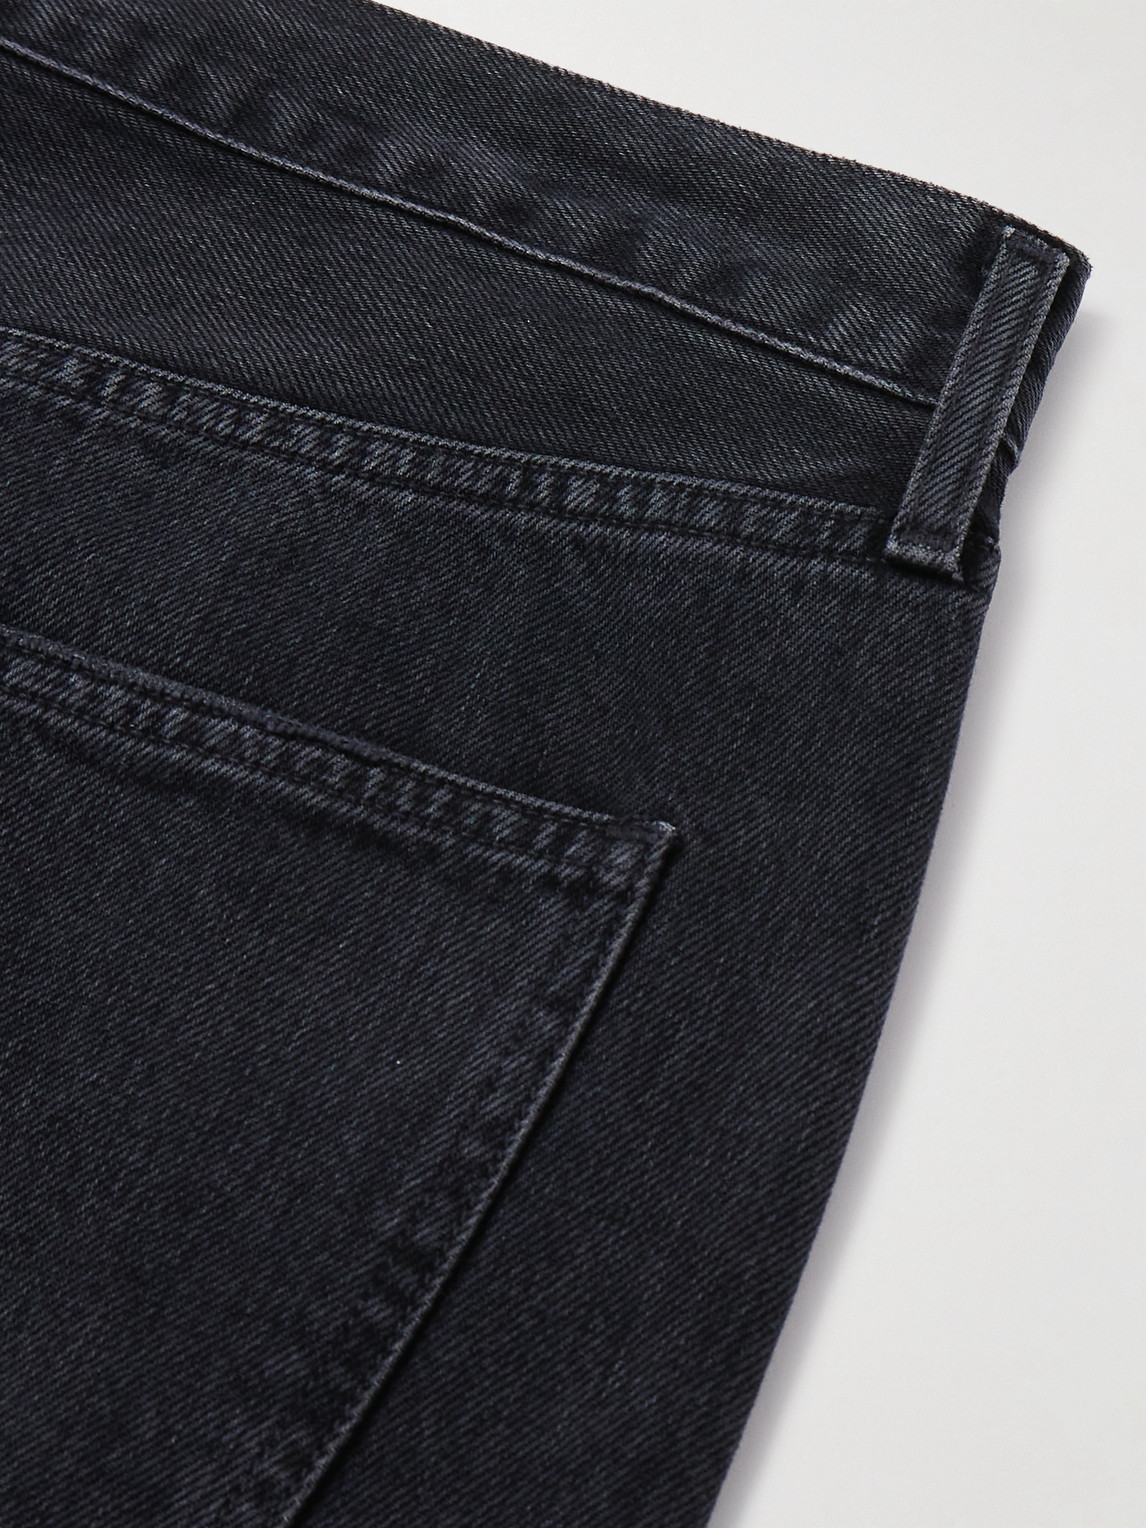 Shop Agolde 90's Straight-leg Distressed Jeans In Black